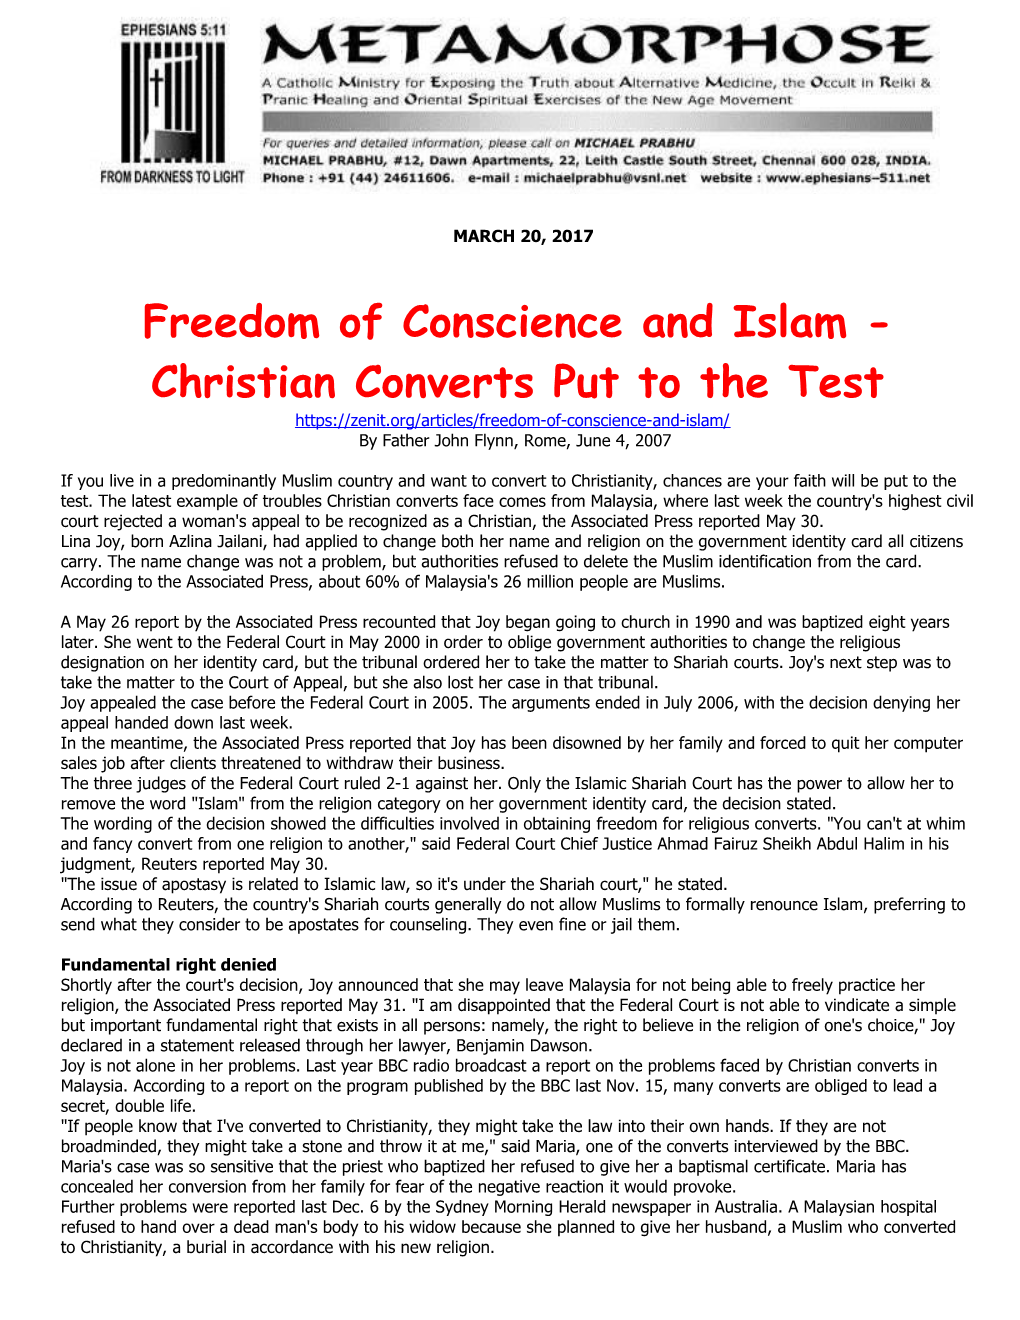 Freedom of Conscience and Islam - Christian Converts Put to the Test